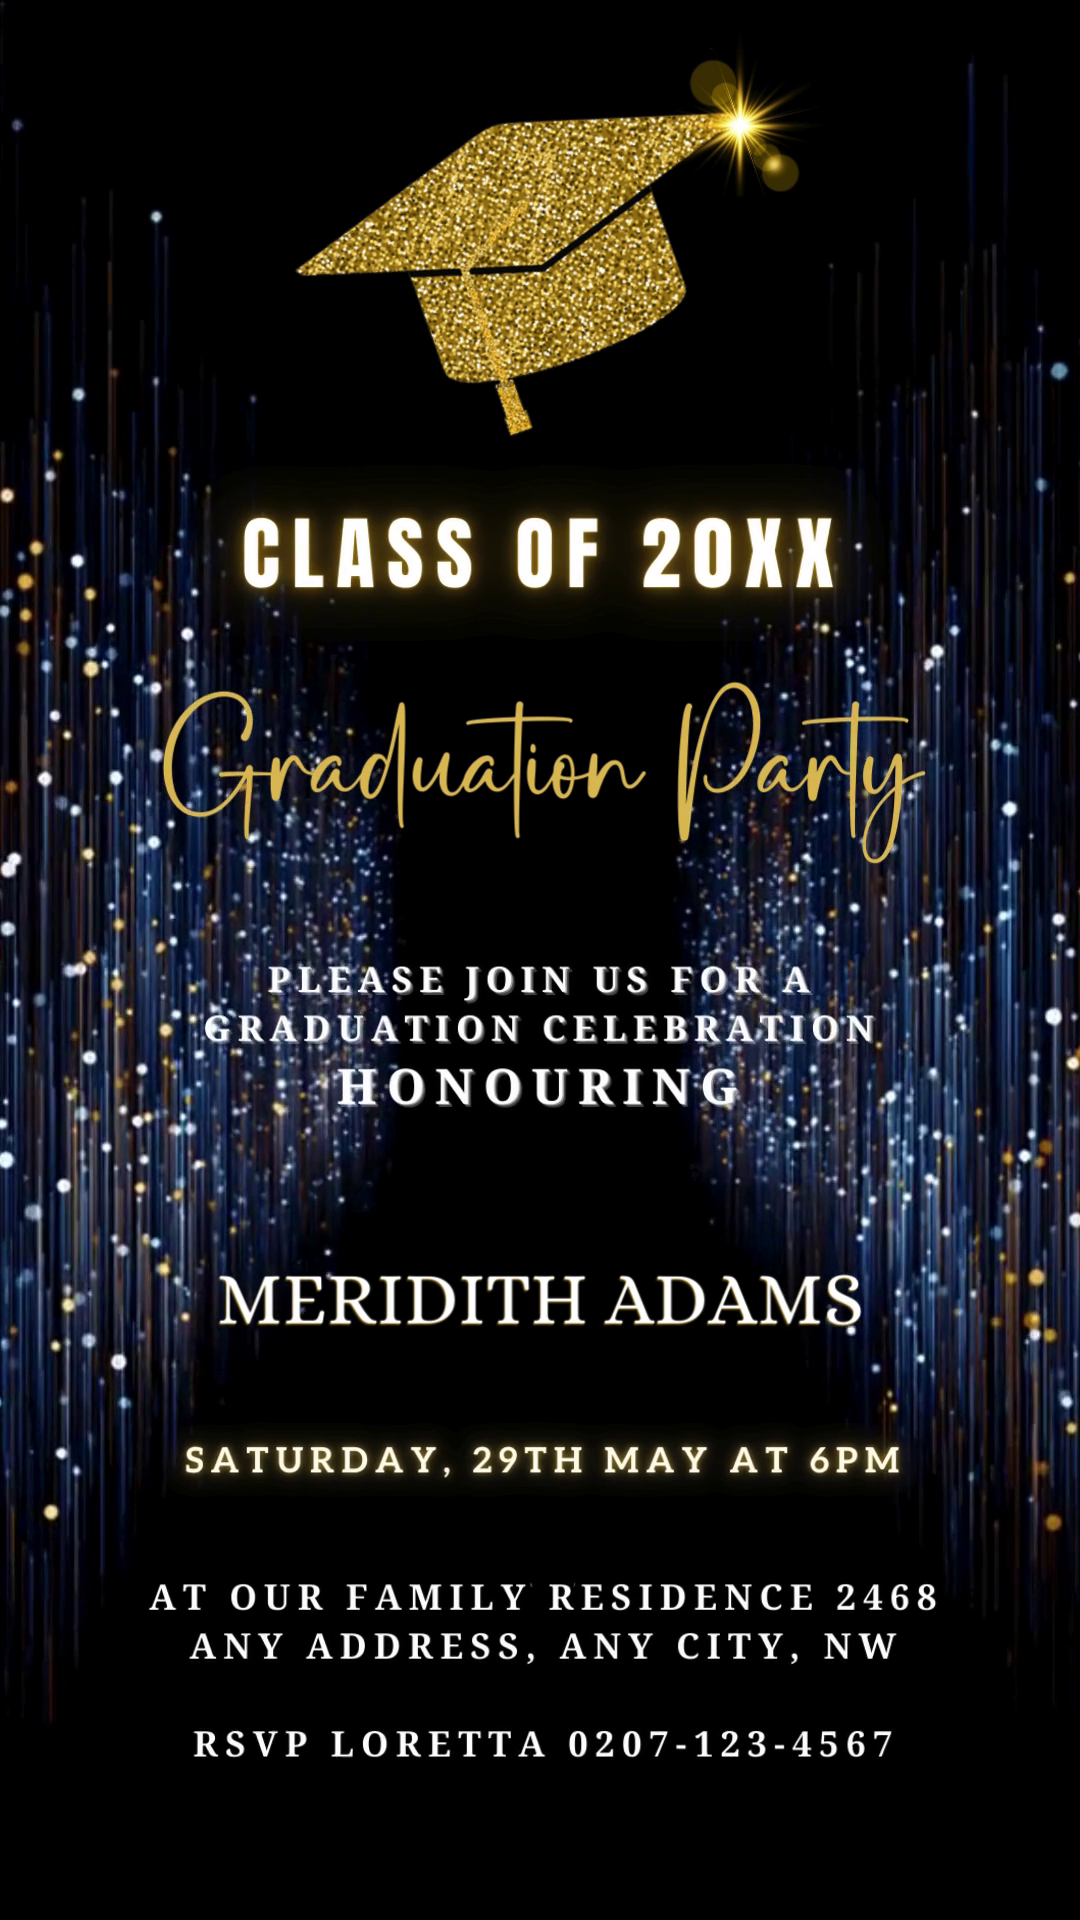 Gold Navy Glitter Graduation Video Invitation featuring customizable text and gold accents. Editable in Canva for a personalized digital invitation.